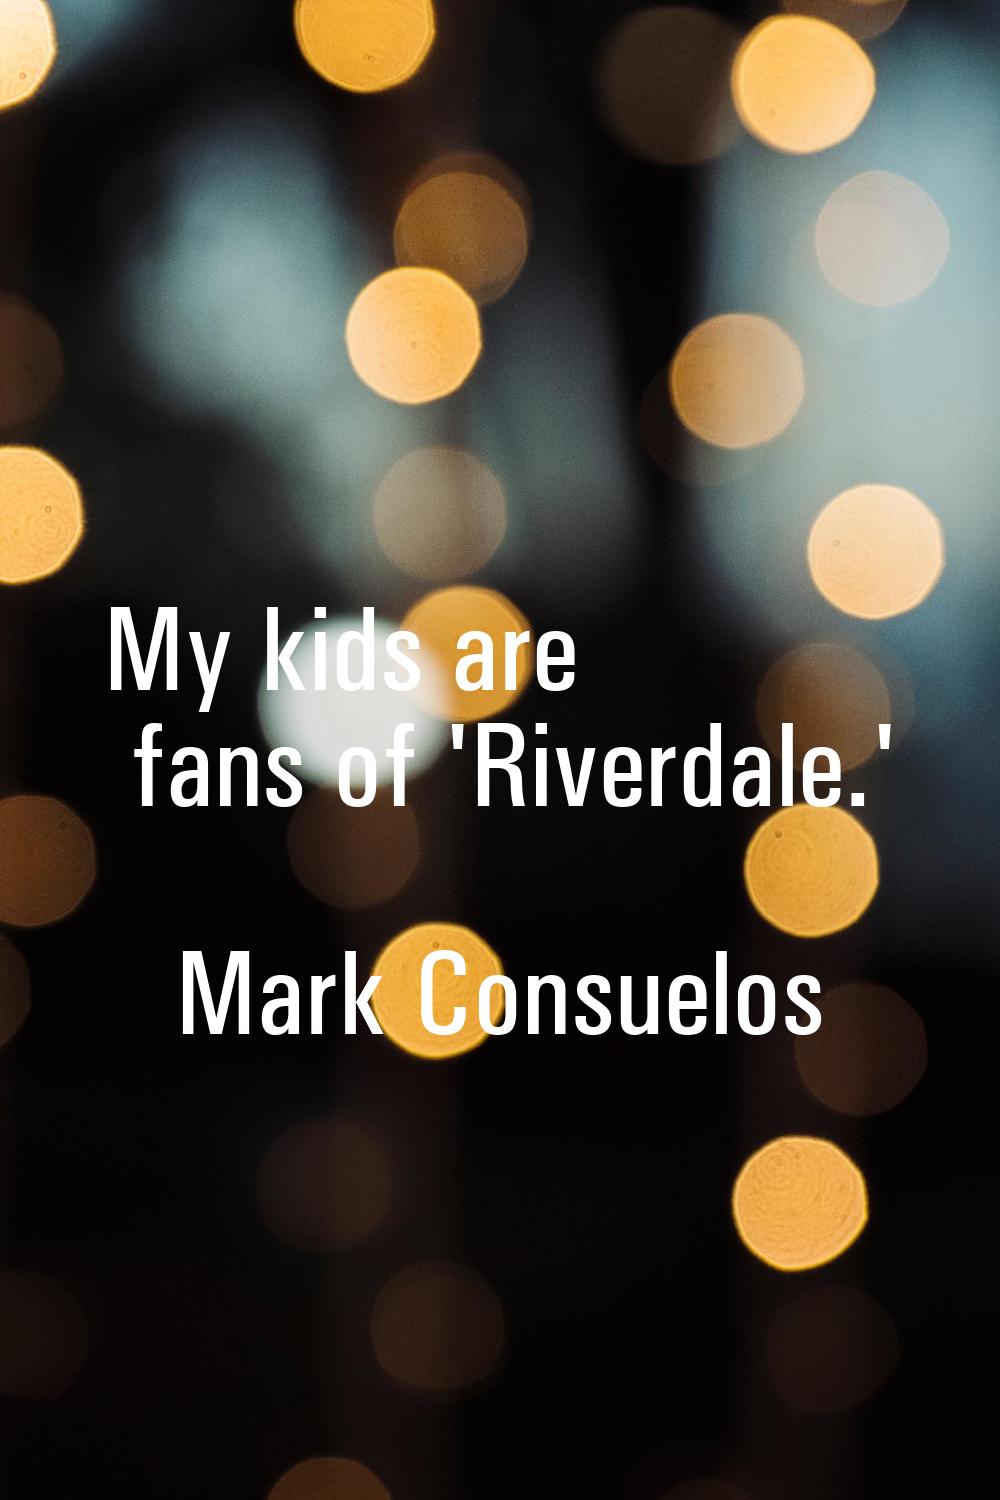 My kids are fans of 'Riverdale.'